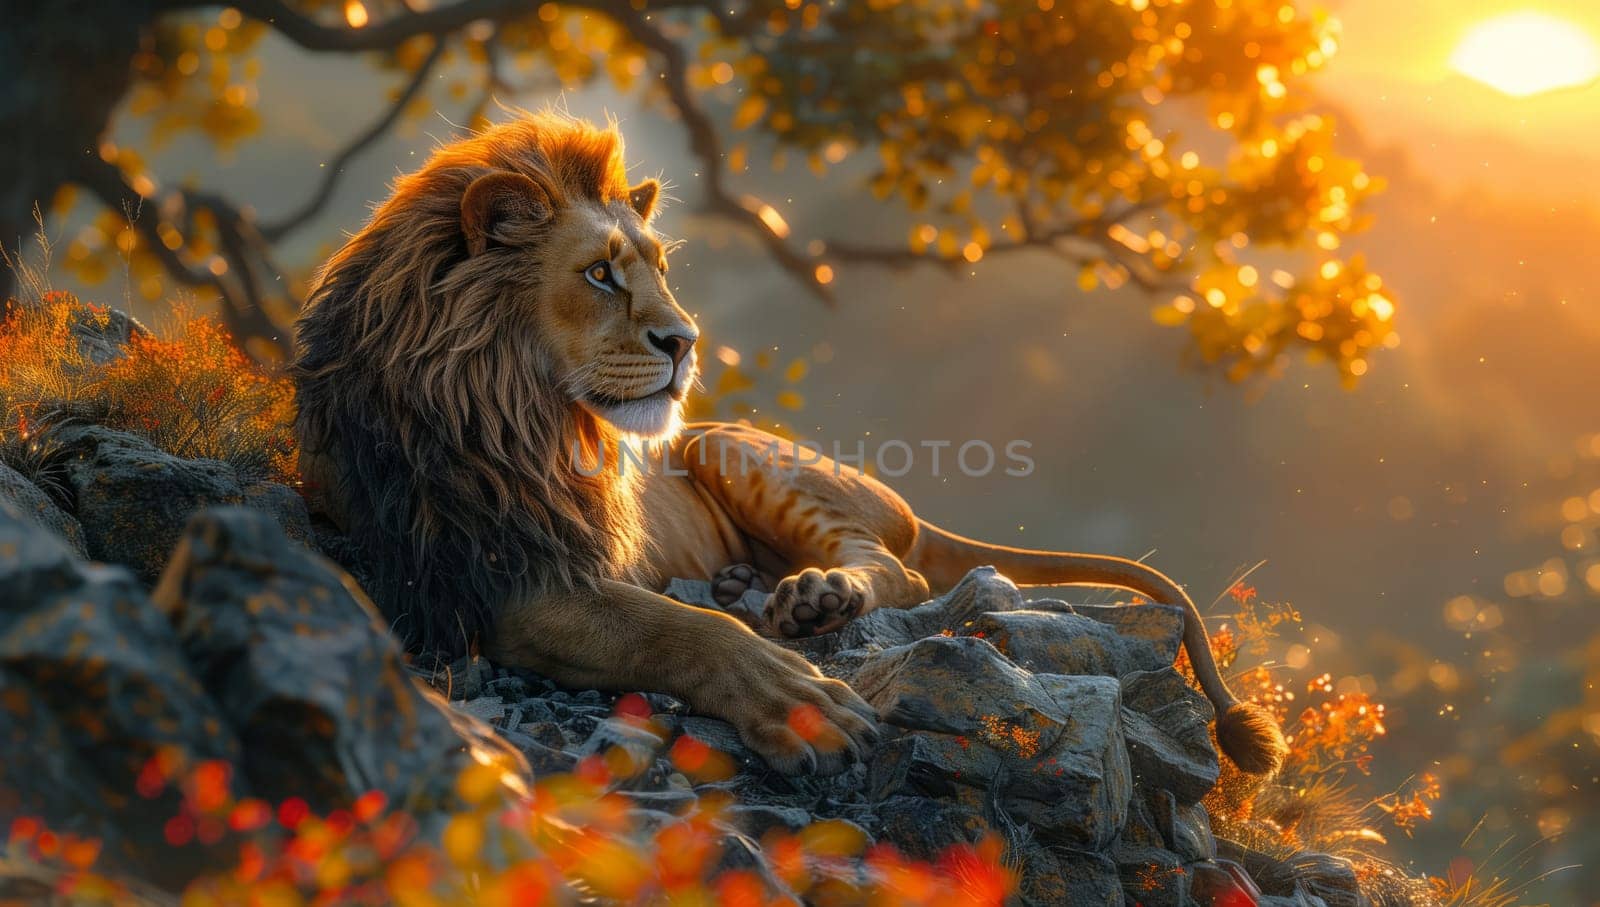 Masai lion, a carnivorous Felidae, sits on rock under tree in natural landscape by richwolf